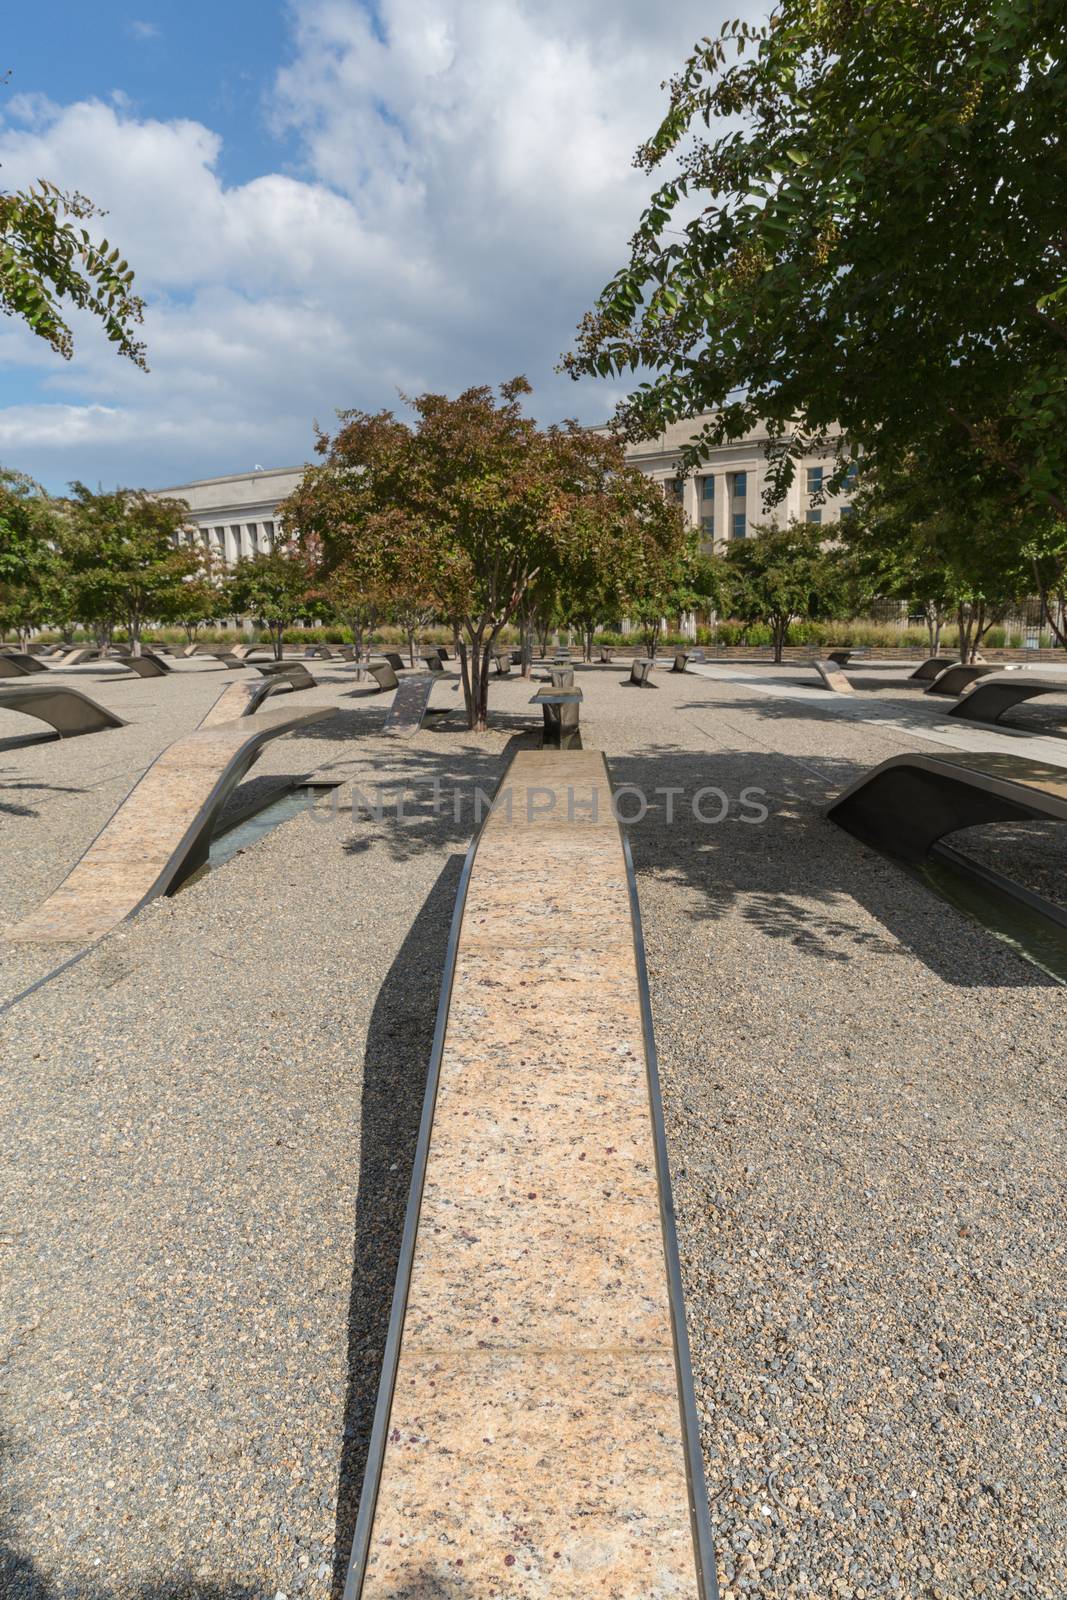 The Pentagon Memorial in Washington DC - no names on display by chrisukphoto